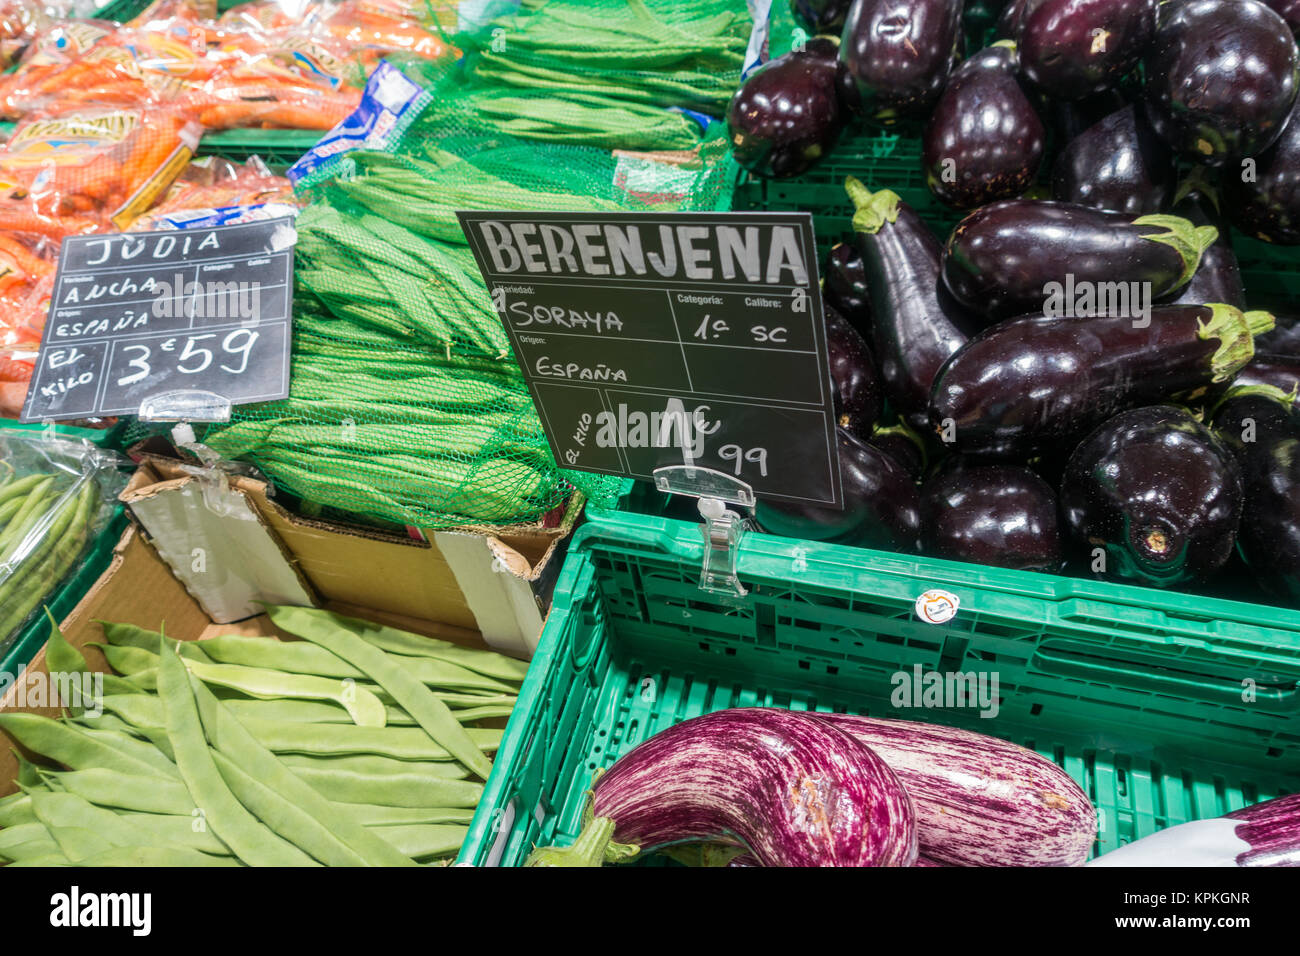 Fresh long beans, runner beans and Aubergines in crates at a Spanish supermarket Stock Photo